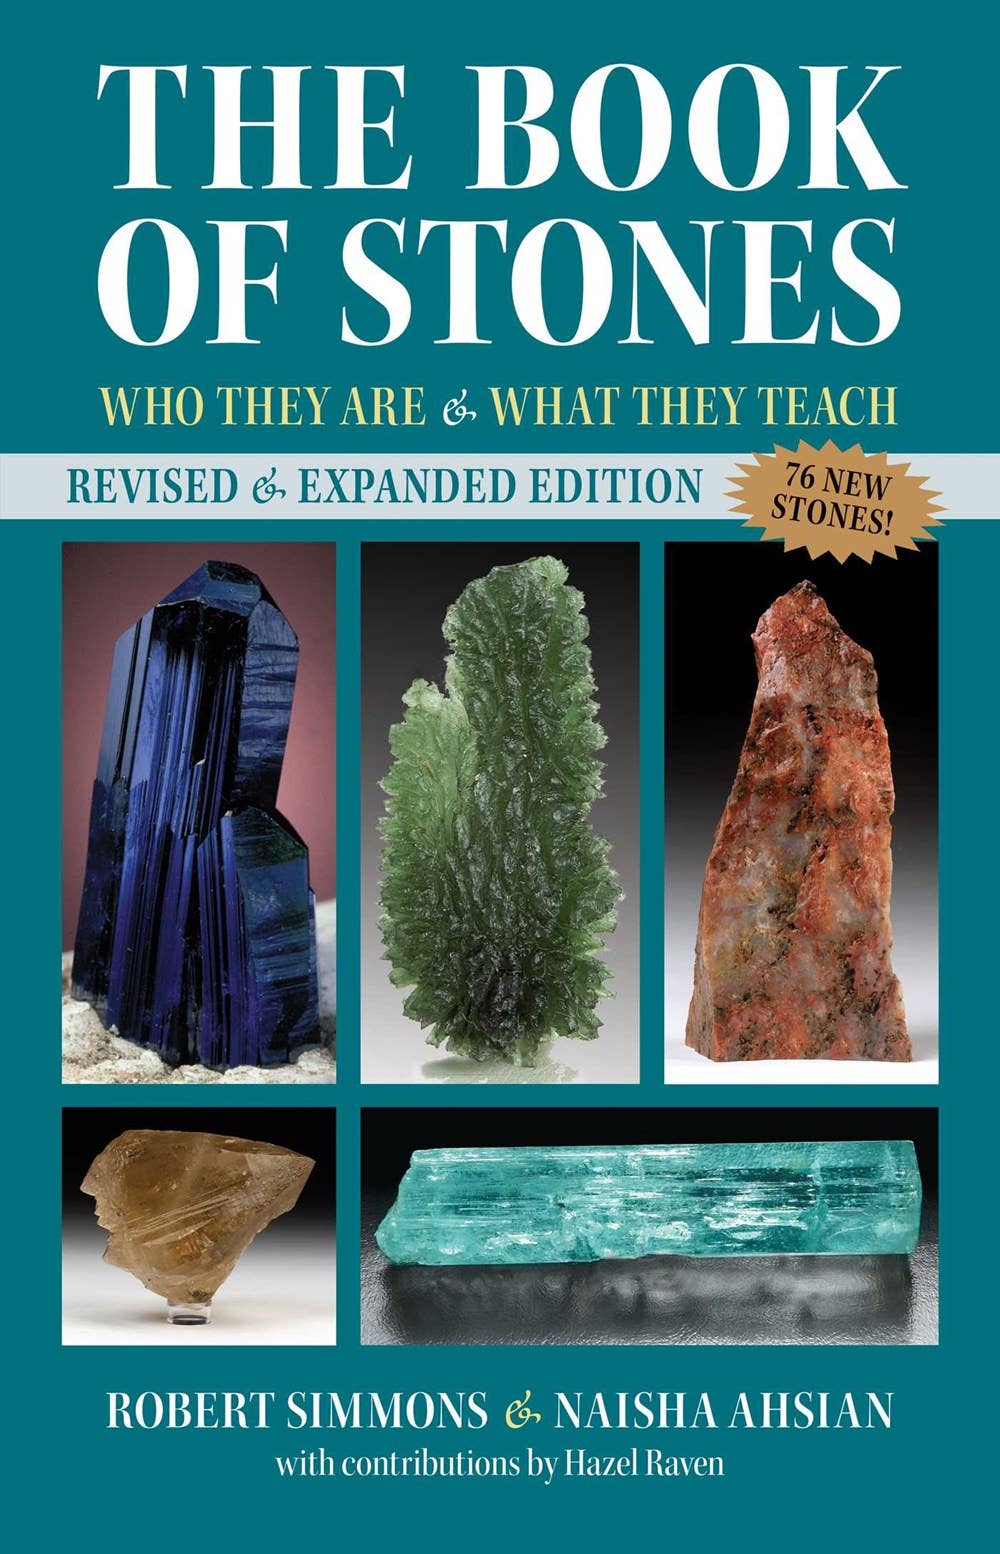 Microcosm Publishing & Distribution - Book of Stones: Who They Are and What They Teach